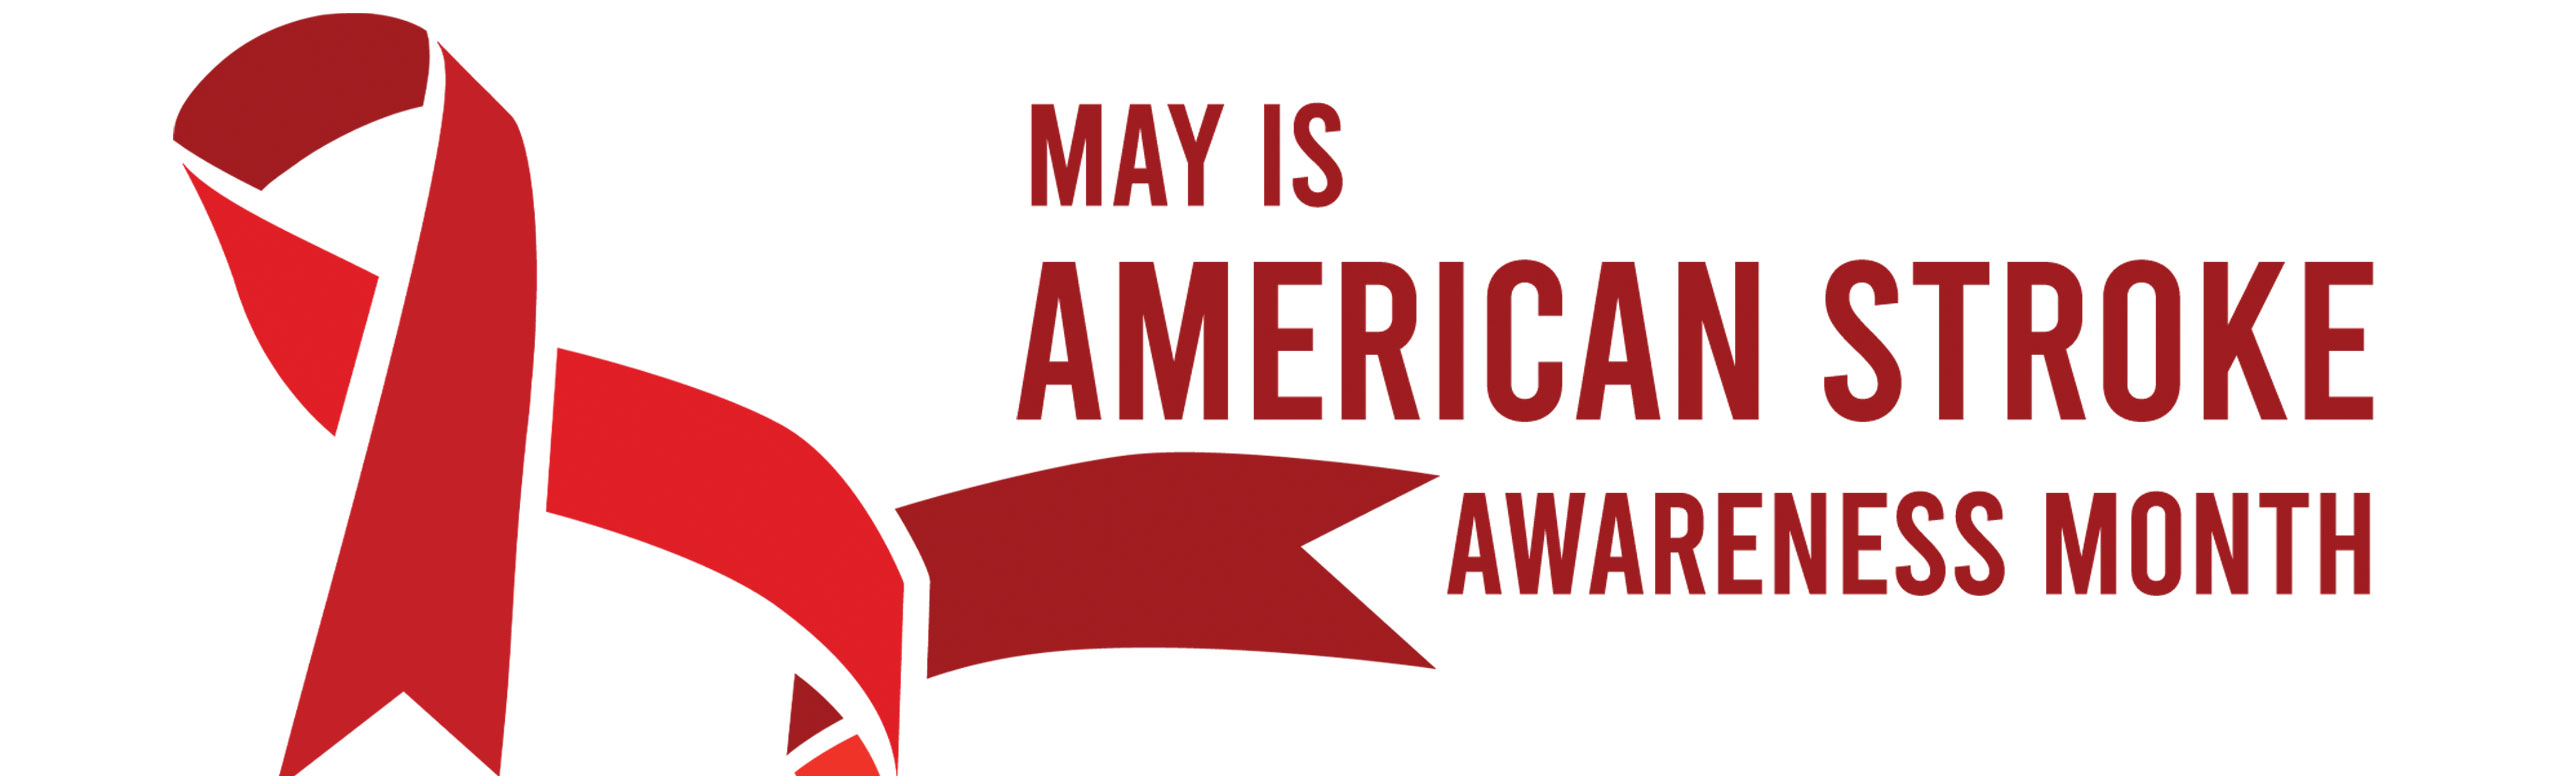 May is American Stroke Awareness Month